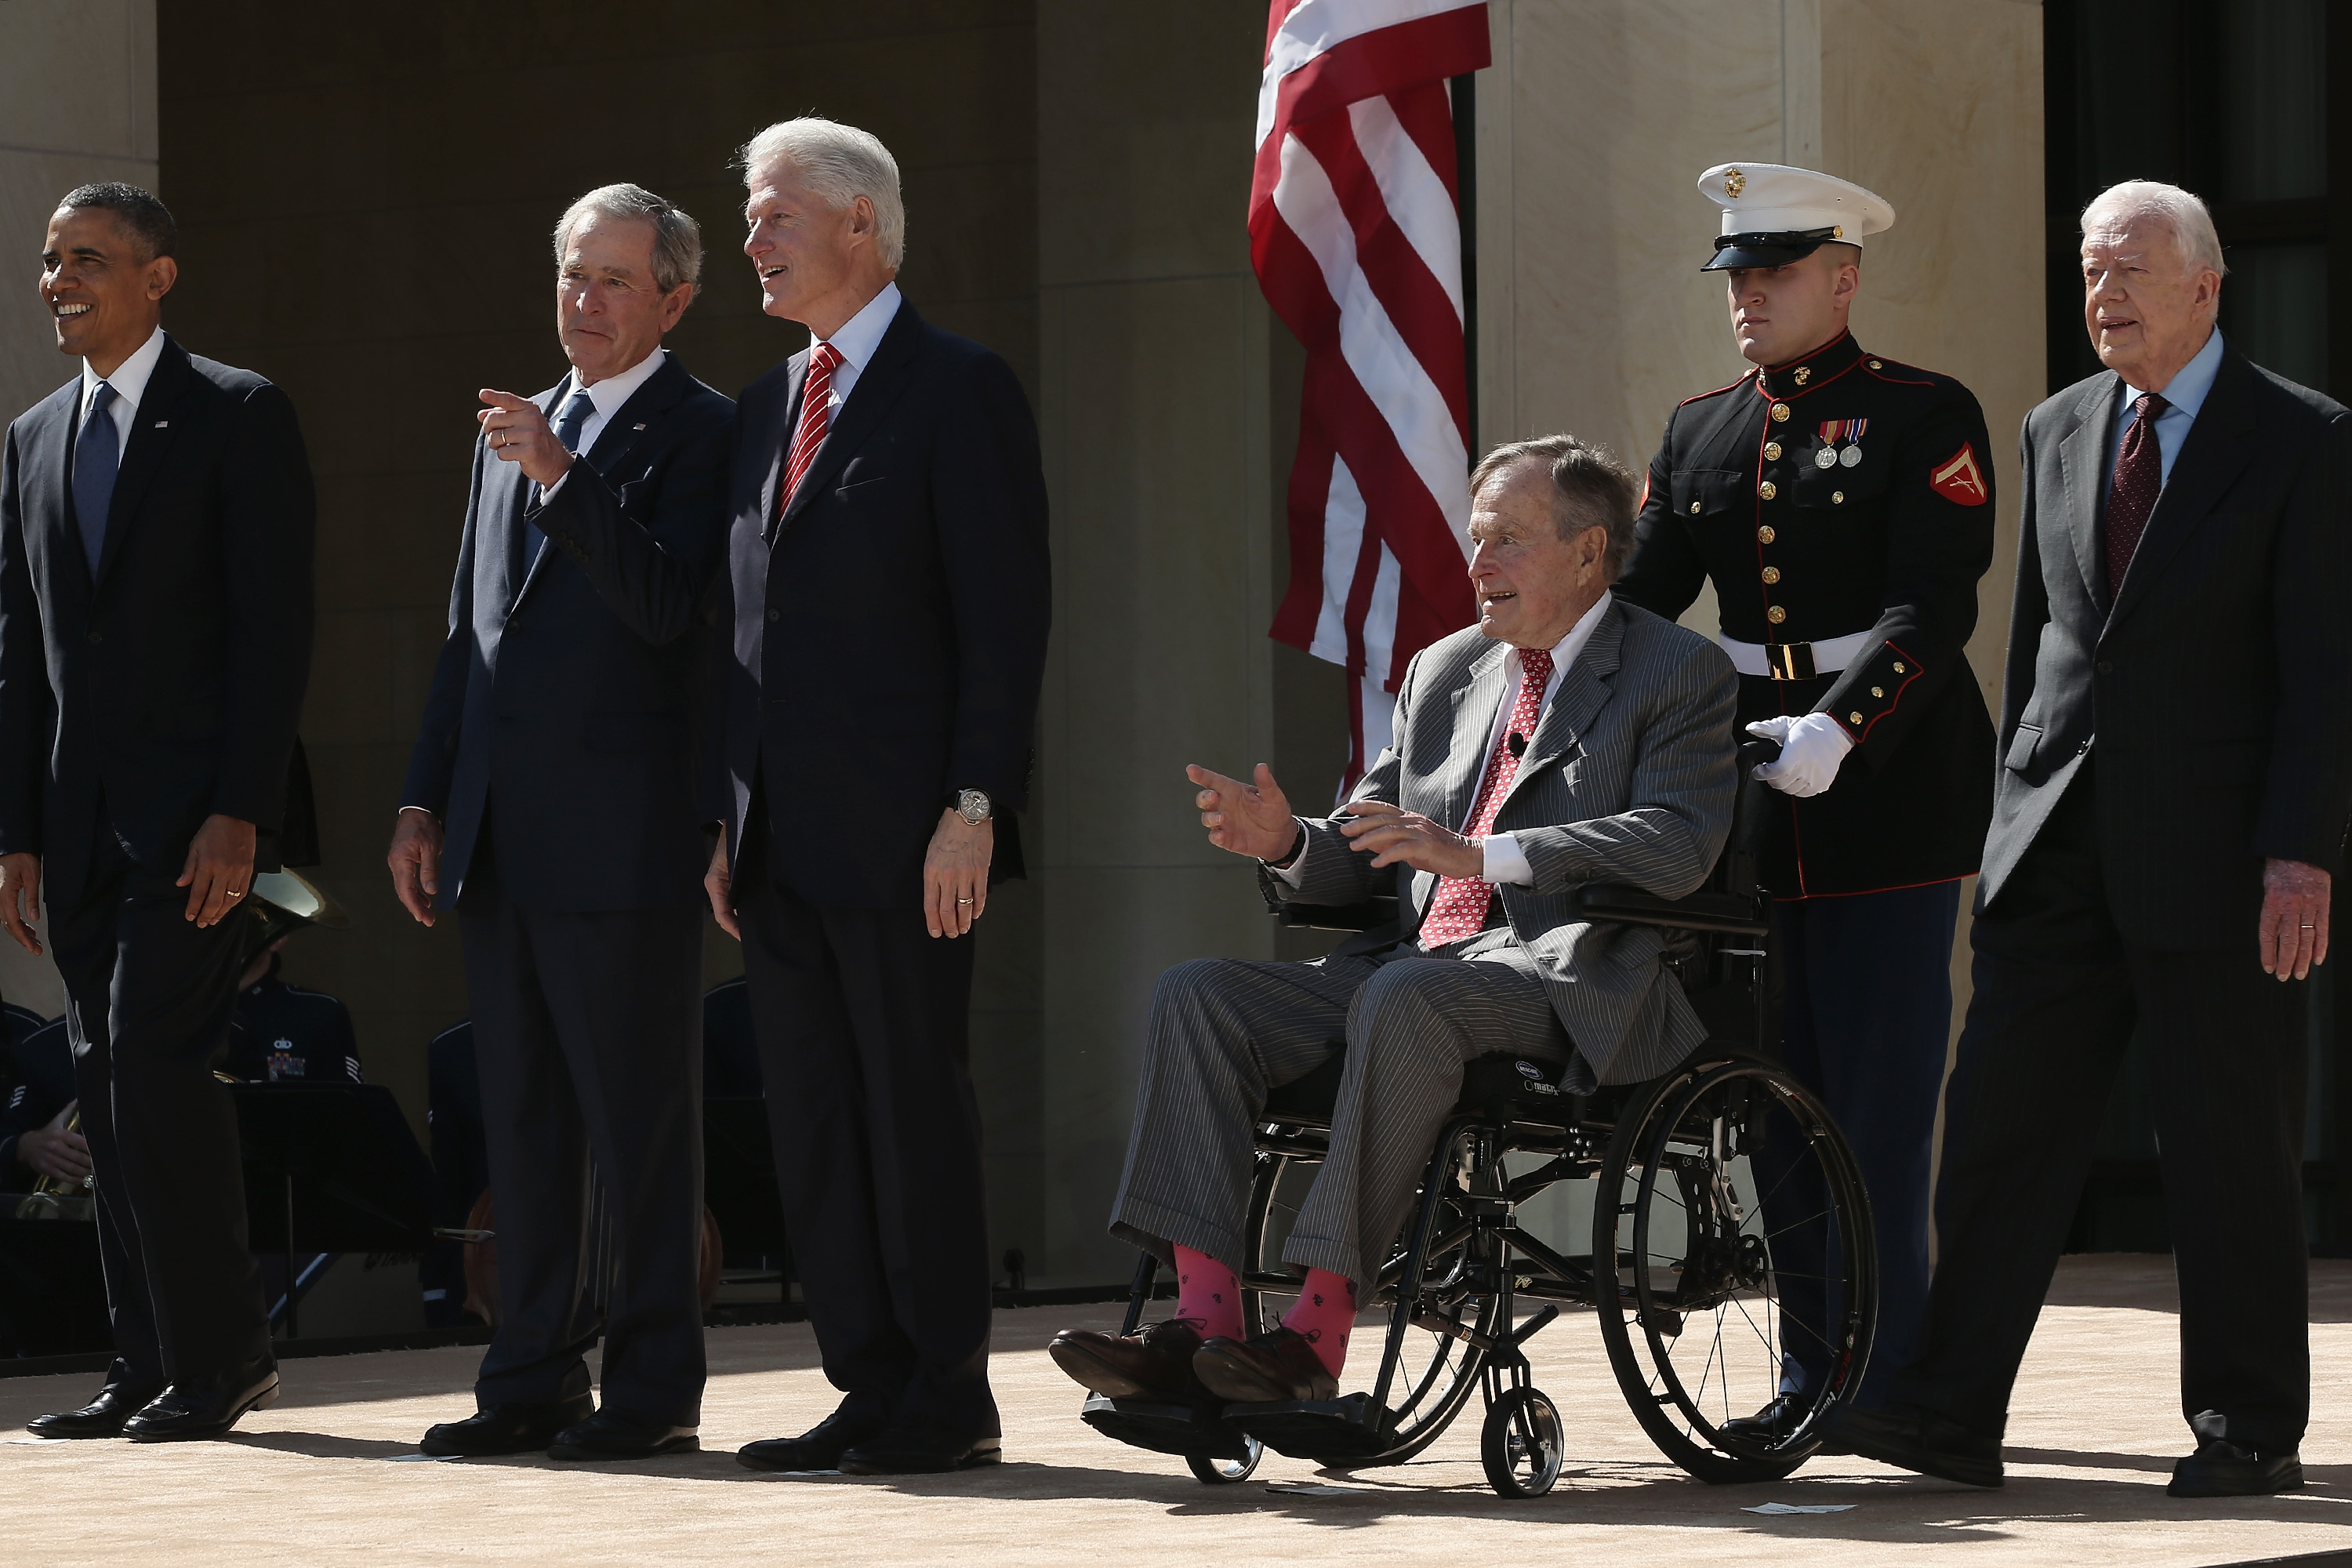 DALLAS, TX - APRIL 25:  (L-R) U.S. President Barack Obama, former President George W. Bush, former President Bill Clinton, former President George H.W. Bush and former President Jimmy Carter attend the opening ceremony of the George W. Bush Presidential Center April 25, 2013 in Dallas, Texas. The Bush library, which is located on the campus of Southern Methodist University, with more than 70 million pages of paper records, 43,000 artifacts, 200 million emails and four million digital photographs, will be opened to the public on May 1, 2013. The library is the 13th presidential library in the National Archives and Records Administration system.  (Photo by Alex Wong/Getty Images)